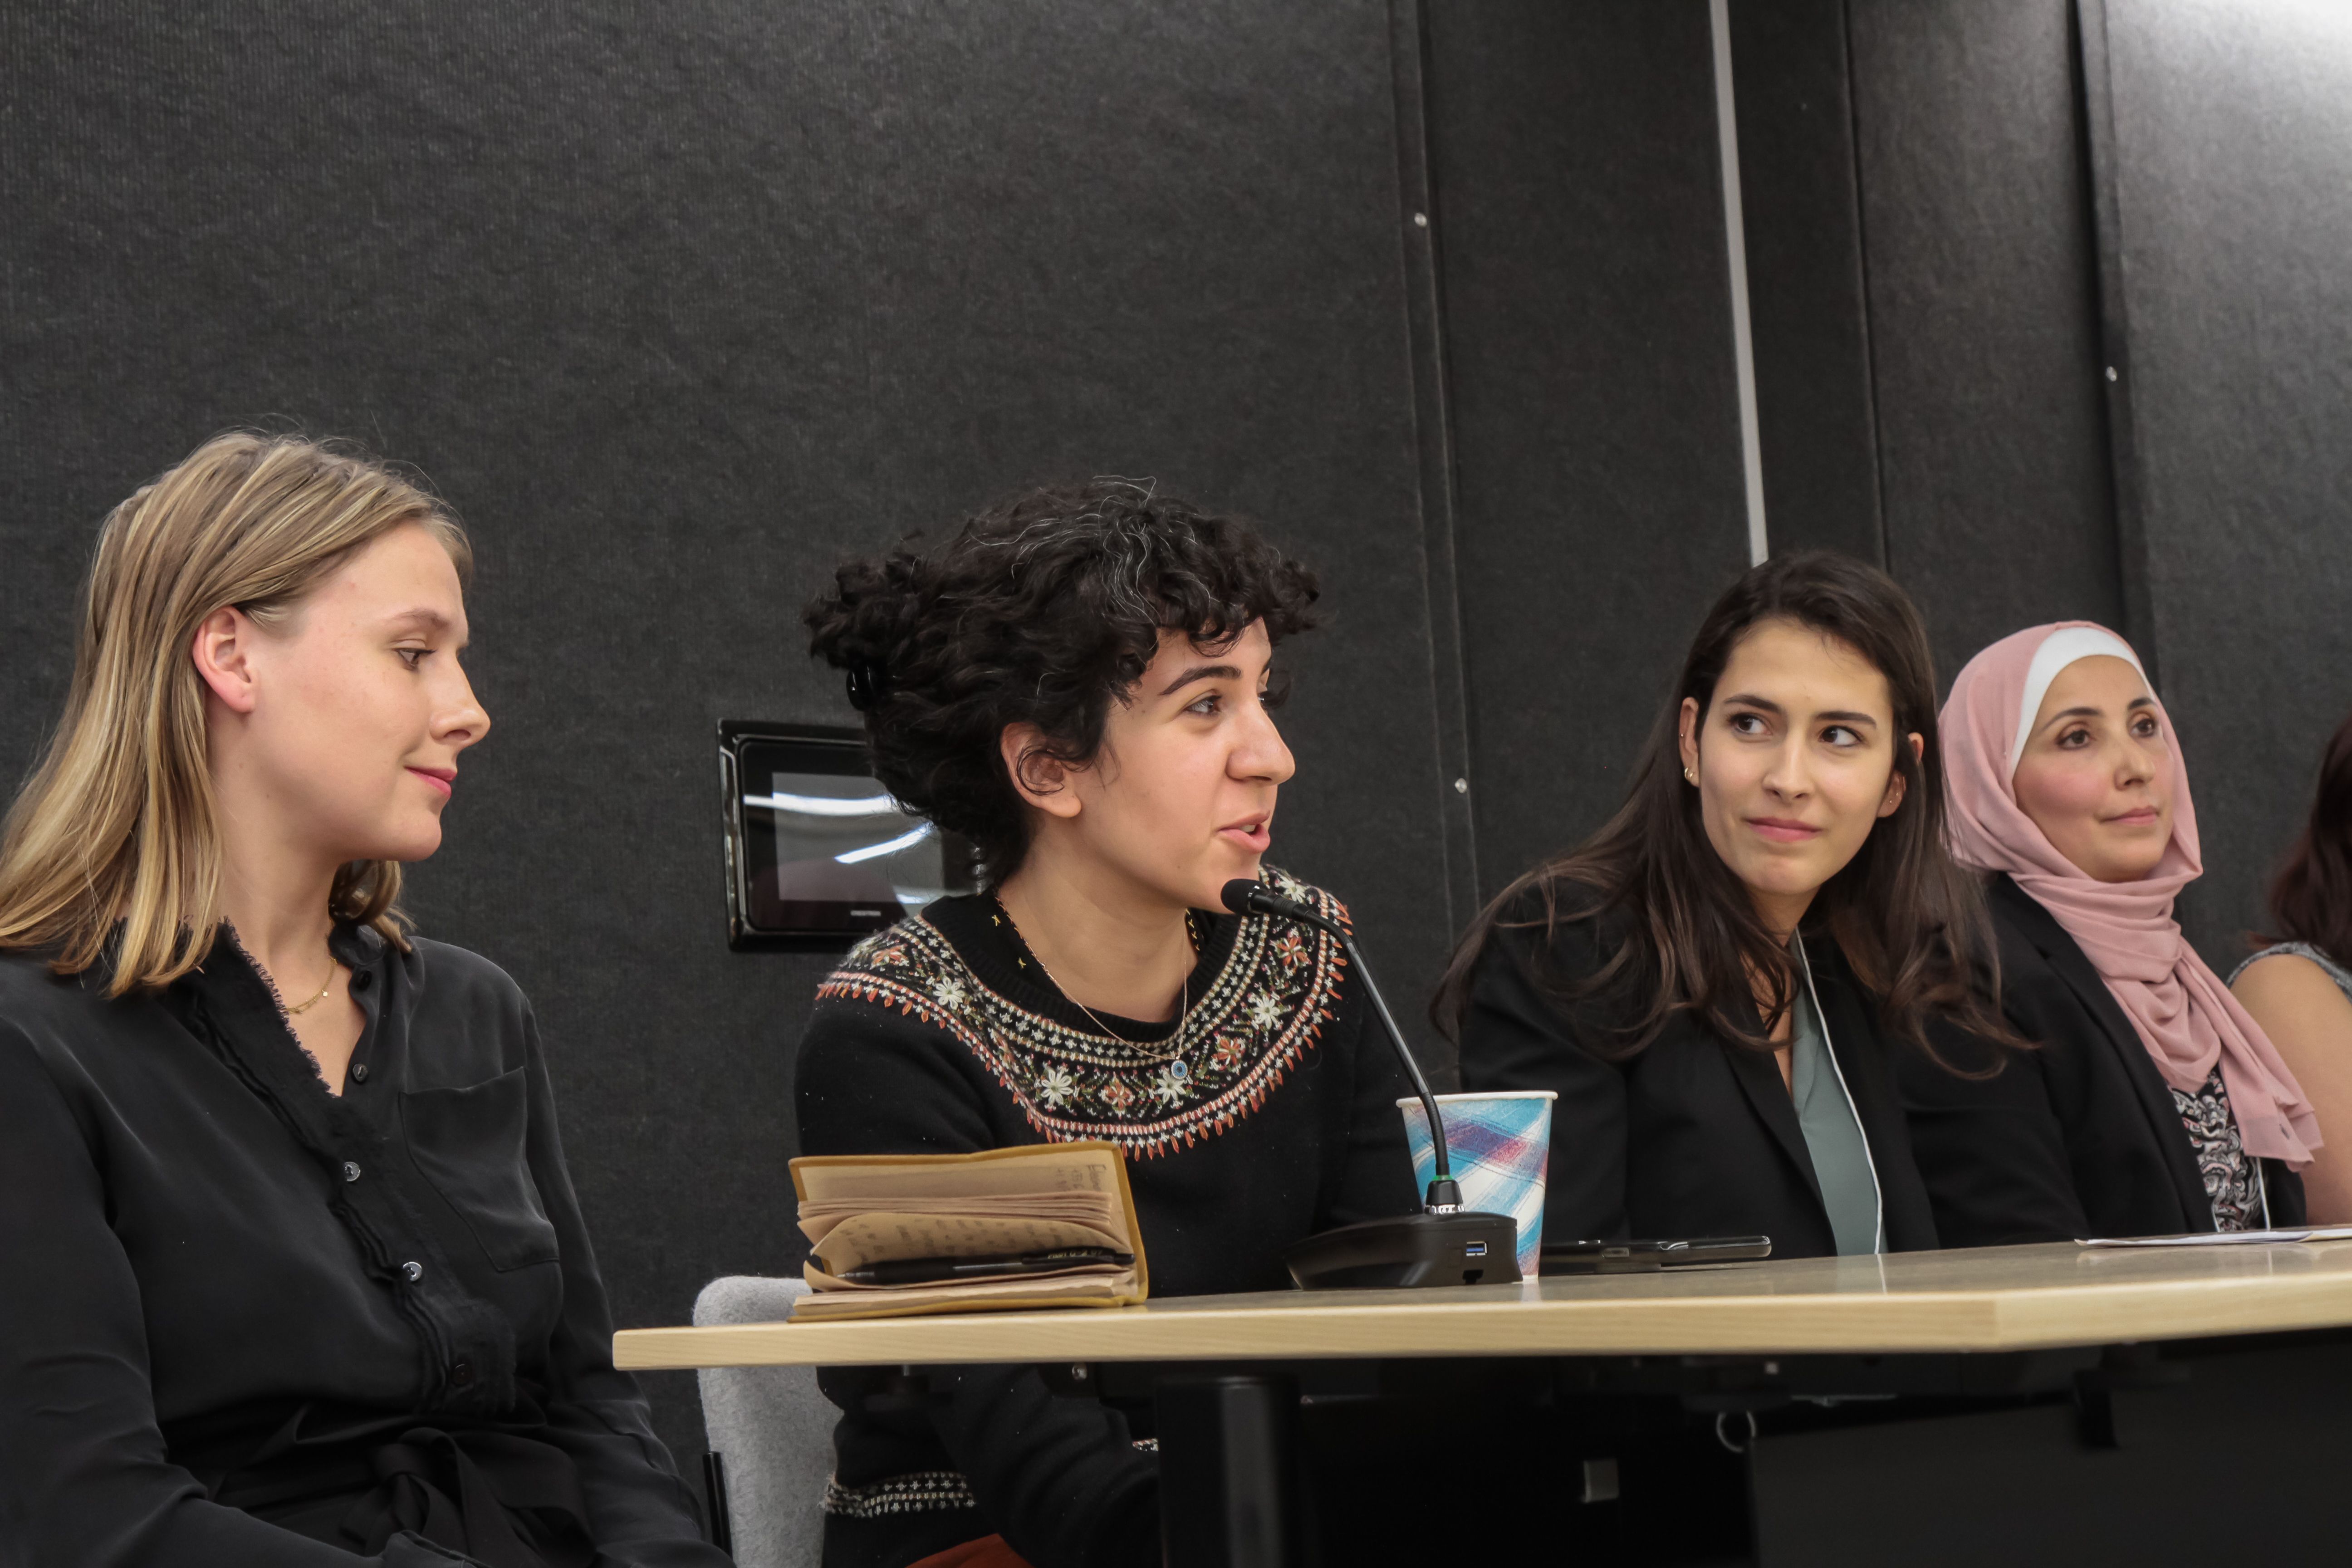 Hana Elias from Columbia University answers a question after her presentation. Image by Libby Moeller. United States, 2019.